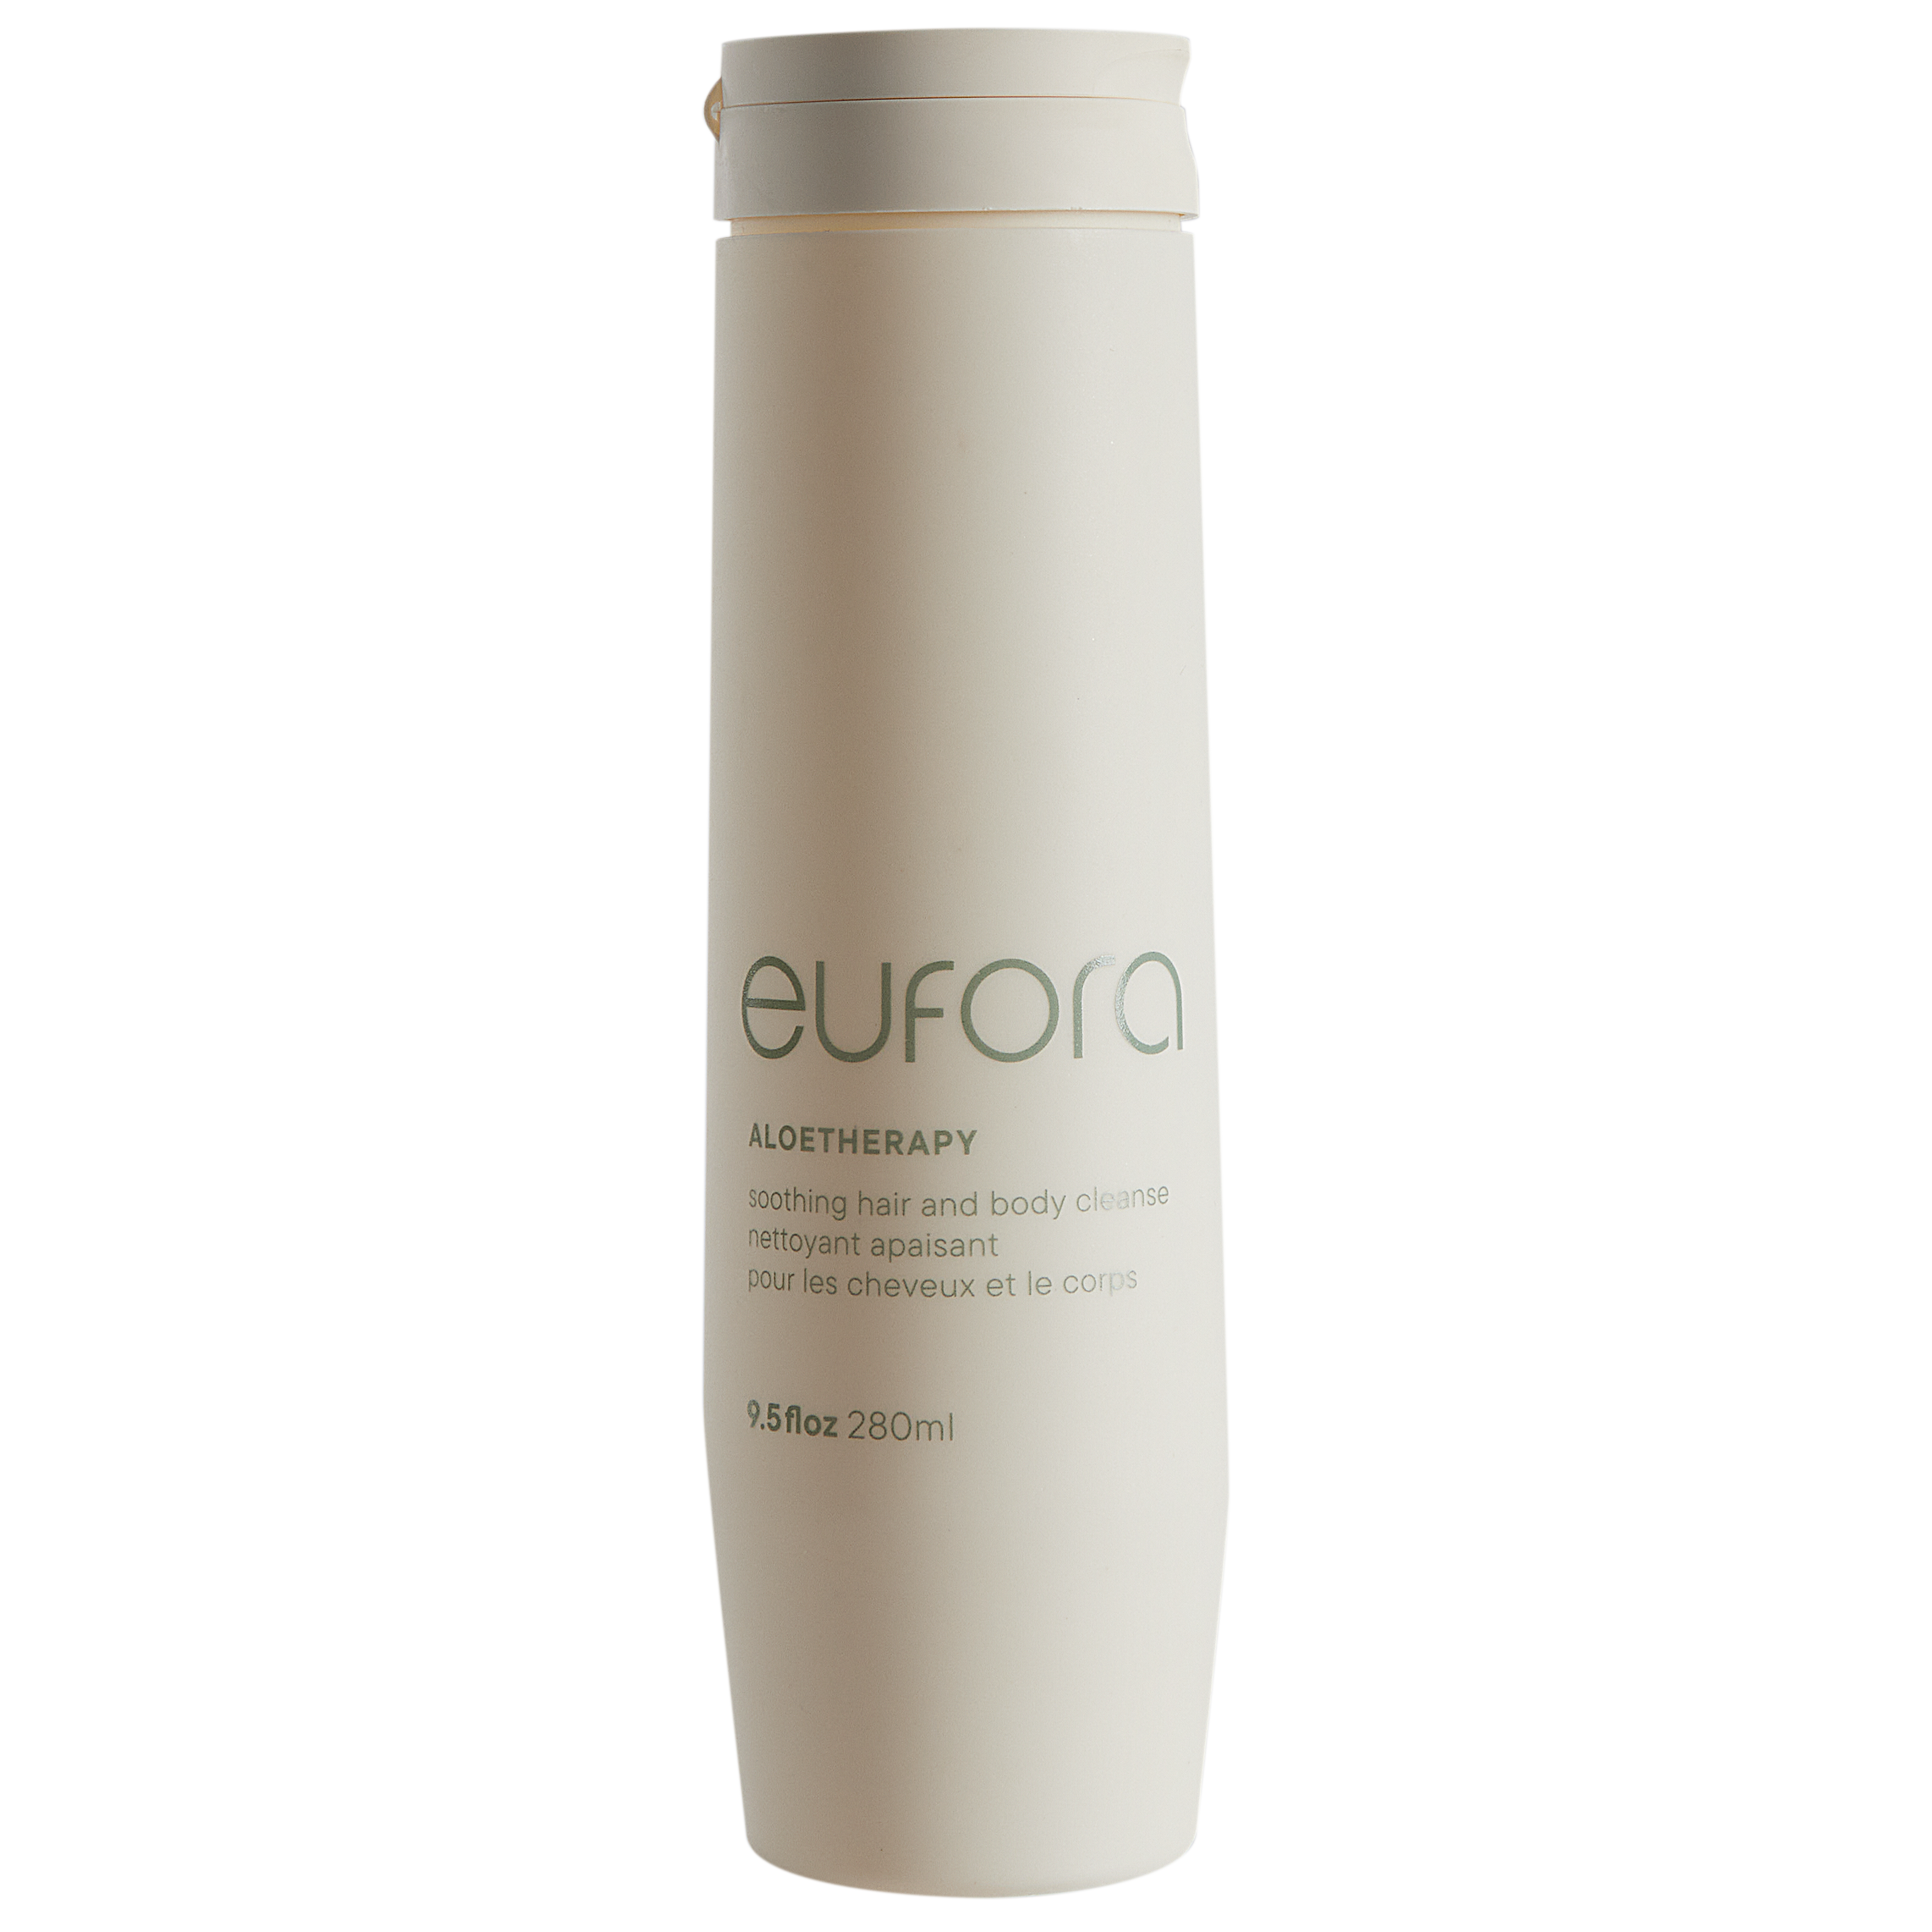 Eufora ALOETHERAPY Soothing Hair & Body Cleanse Shampoo